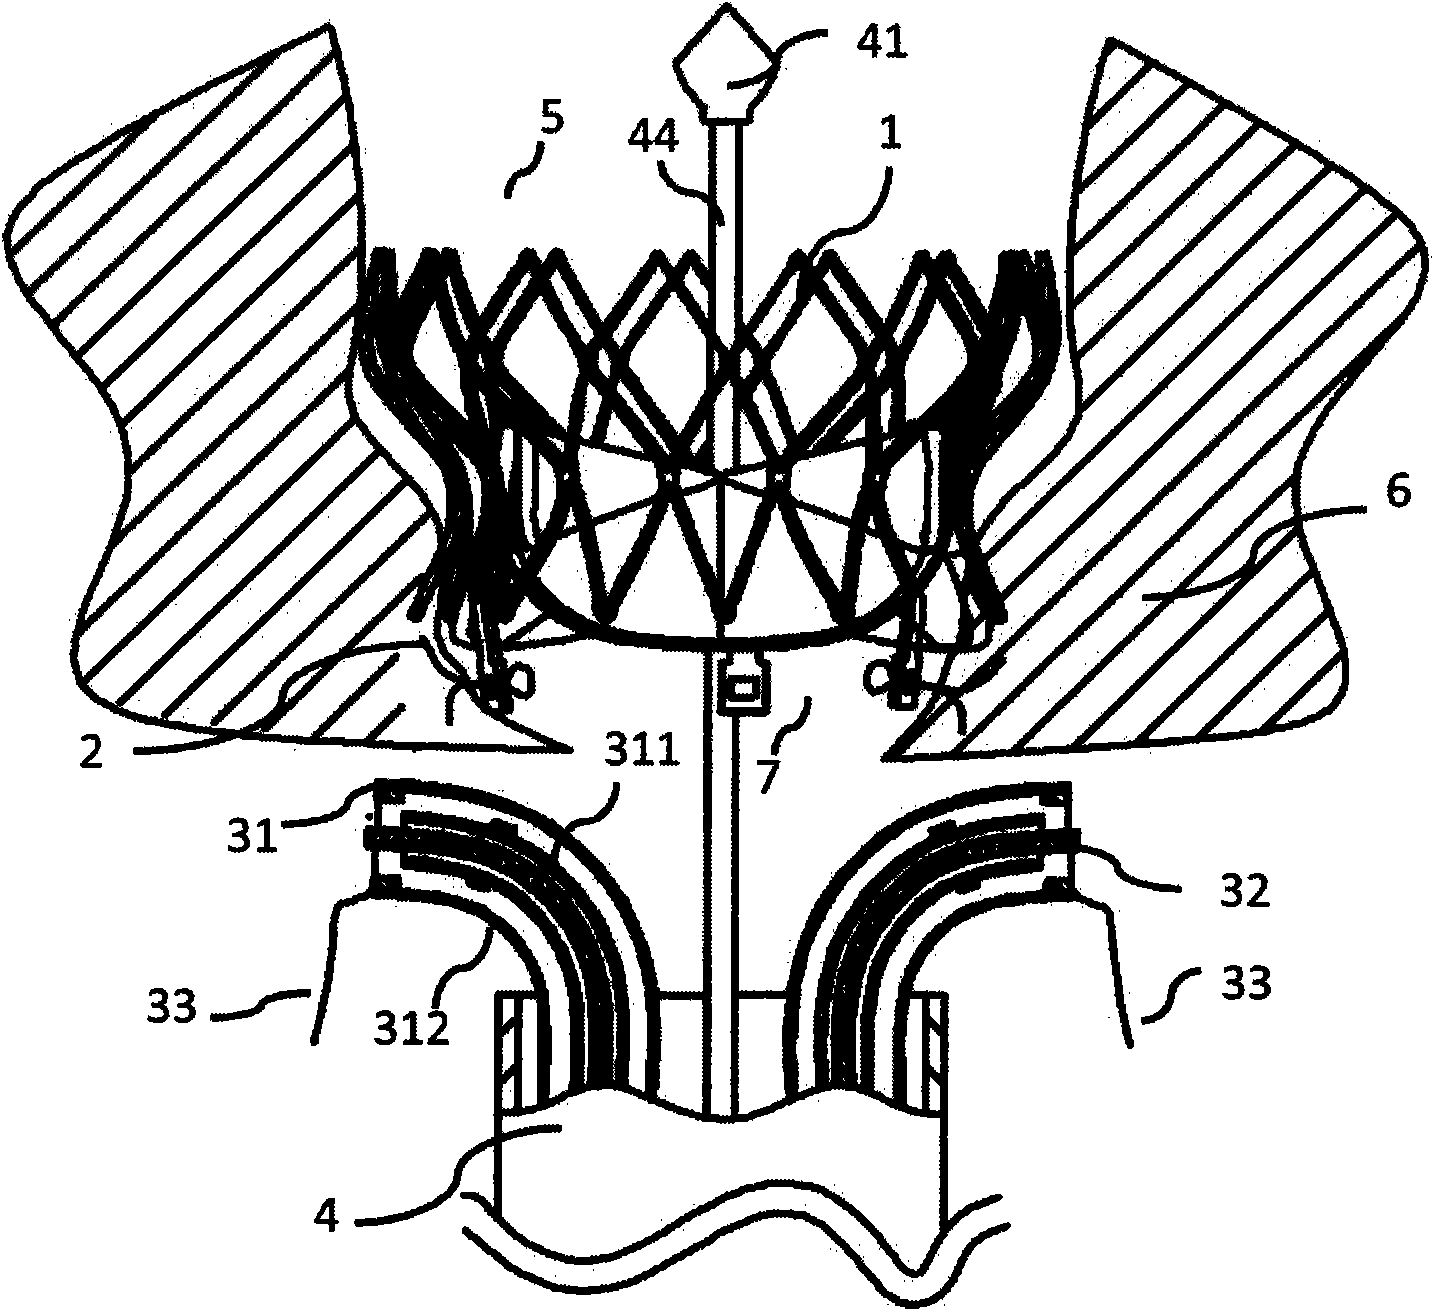 Heart valve implantation device provided with anchoring device